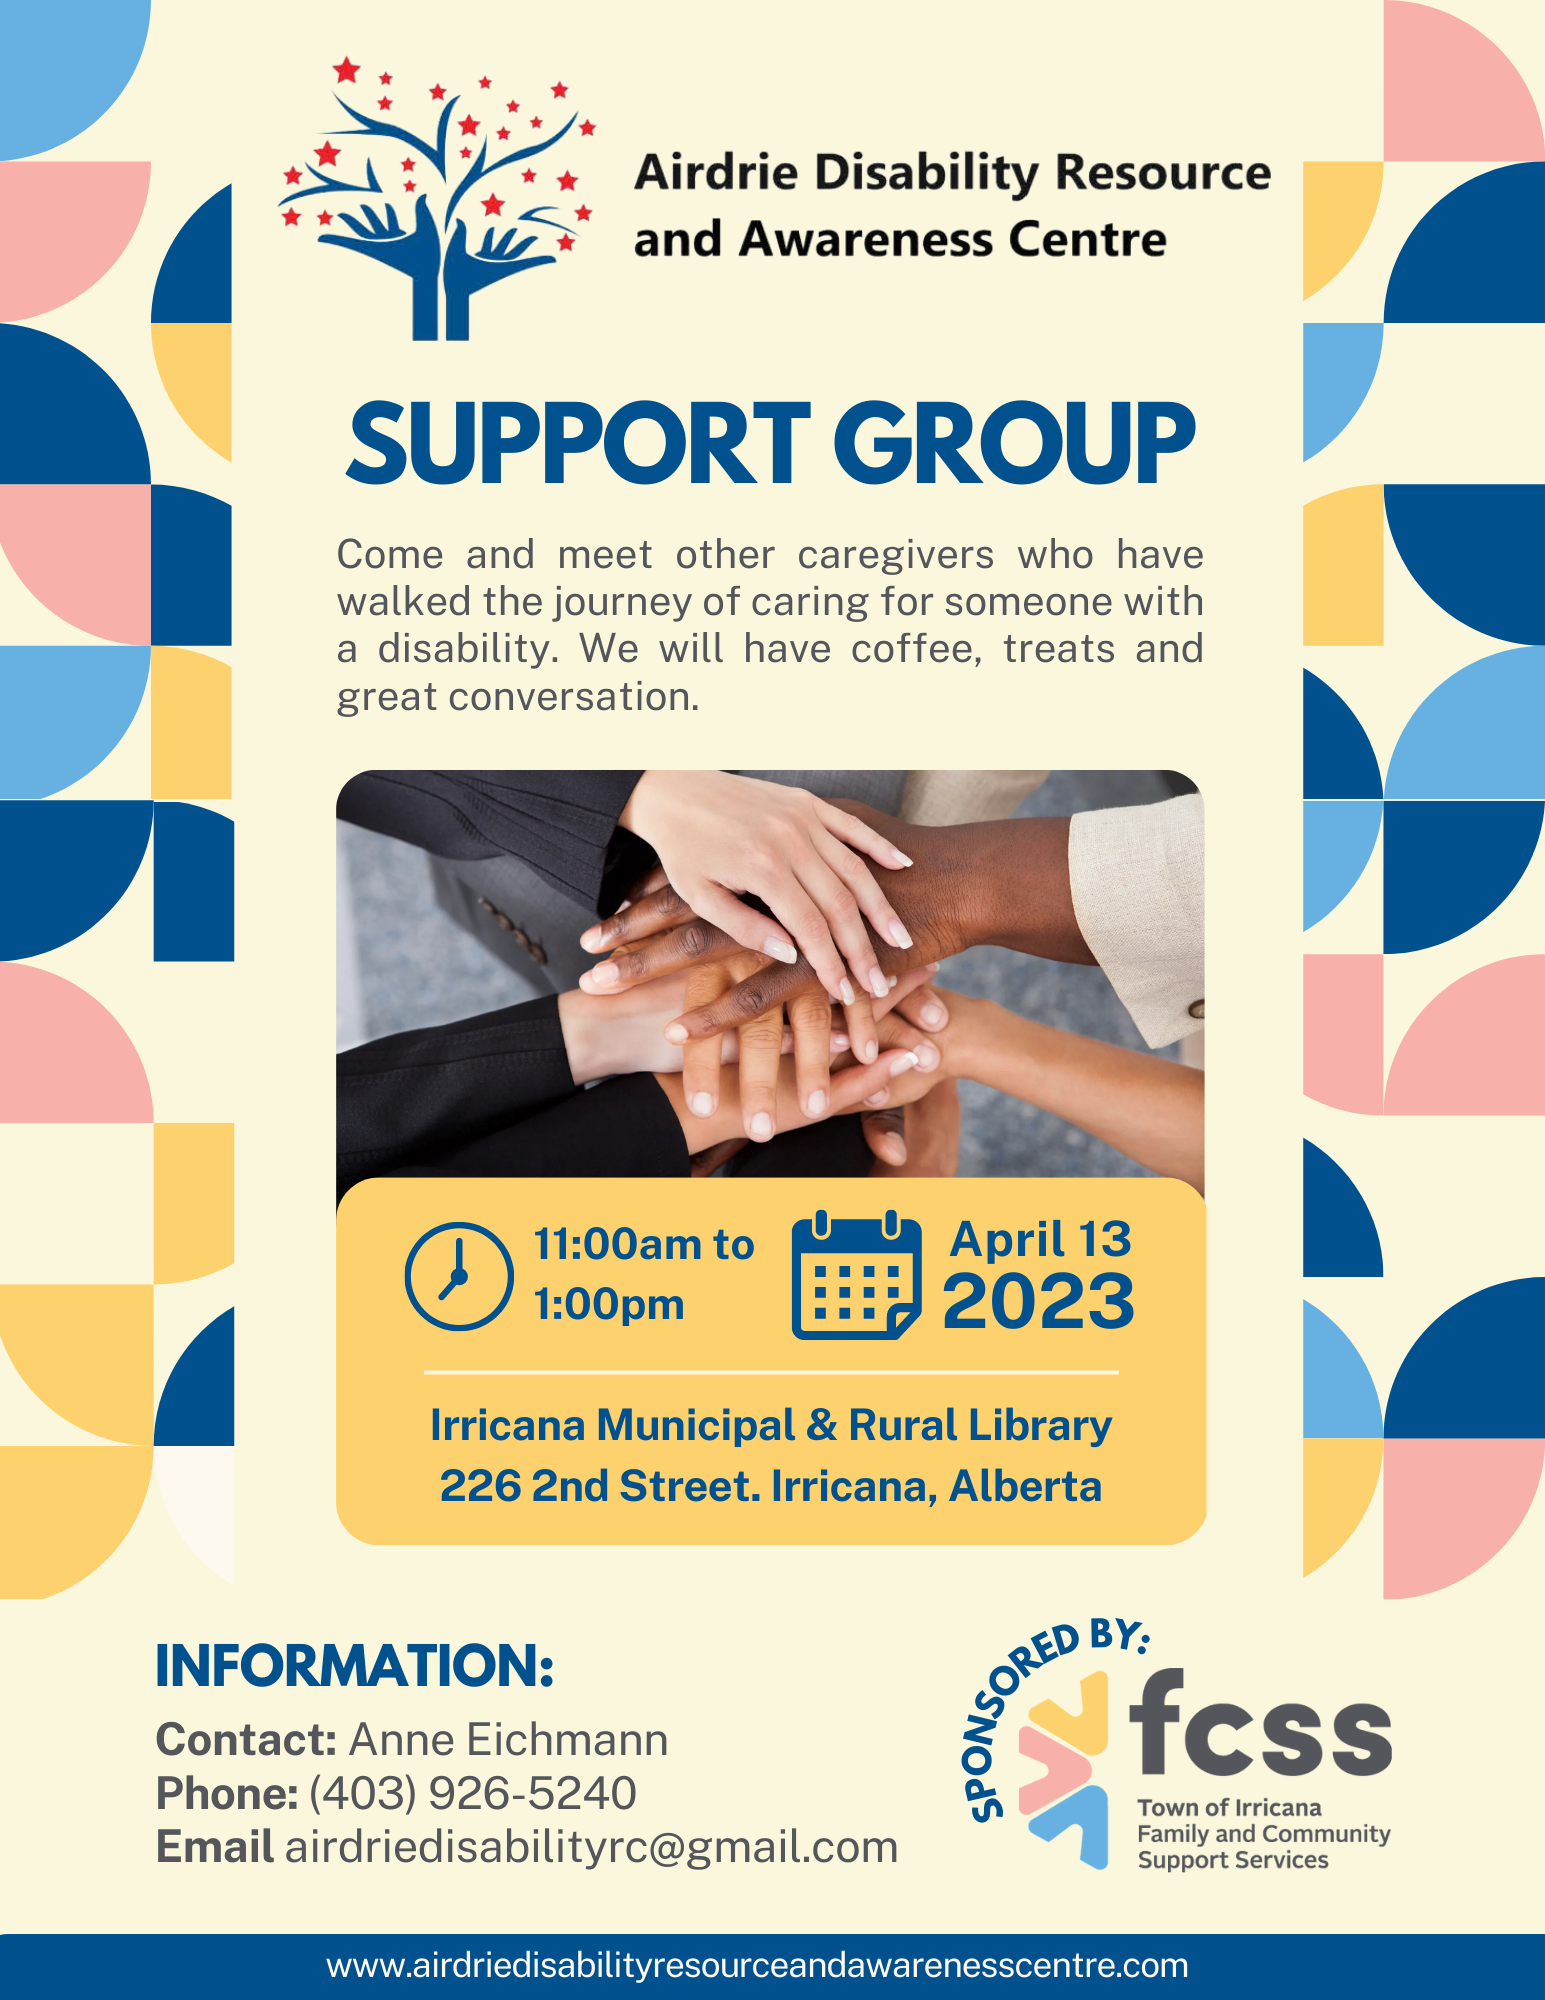 Airdrie Disability Resource Support Group at the Irricana Library on April 13, 2023